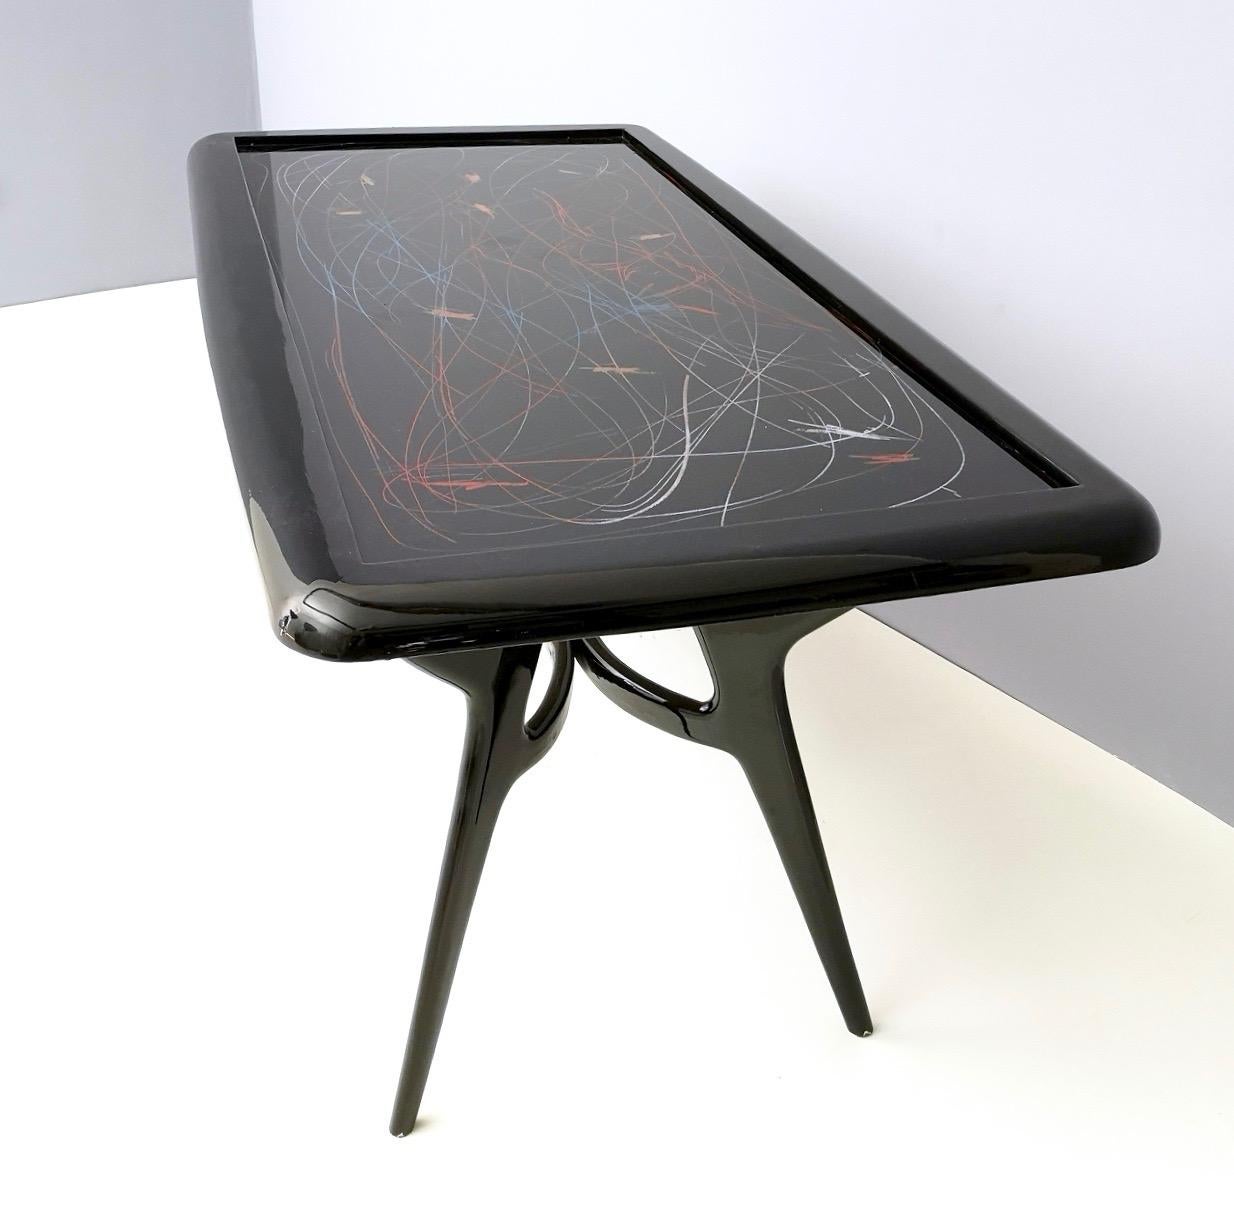 1950s Style Dining Table with Glass Top Lacquered by Enzio Wenk, Italy, 2019 In Excellent Condition For Sale In Bresso, Lombardy